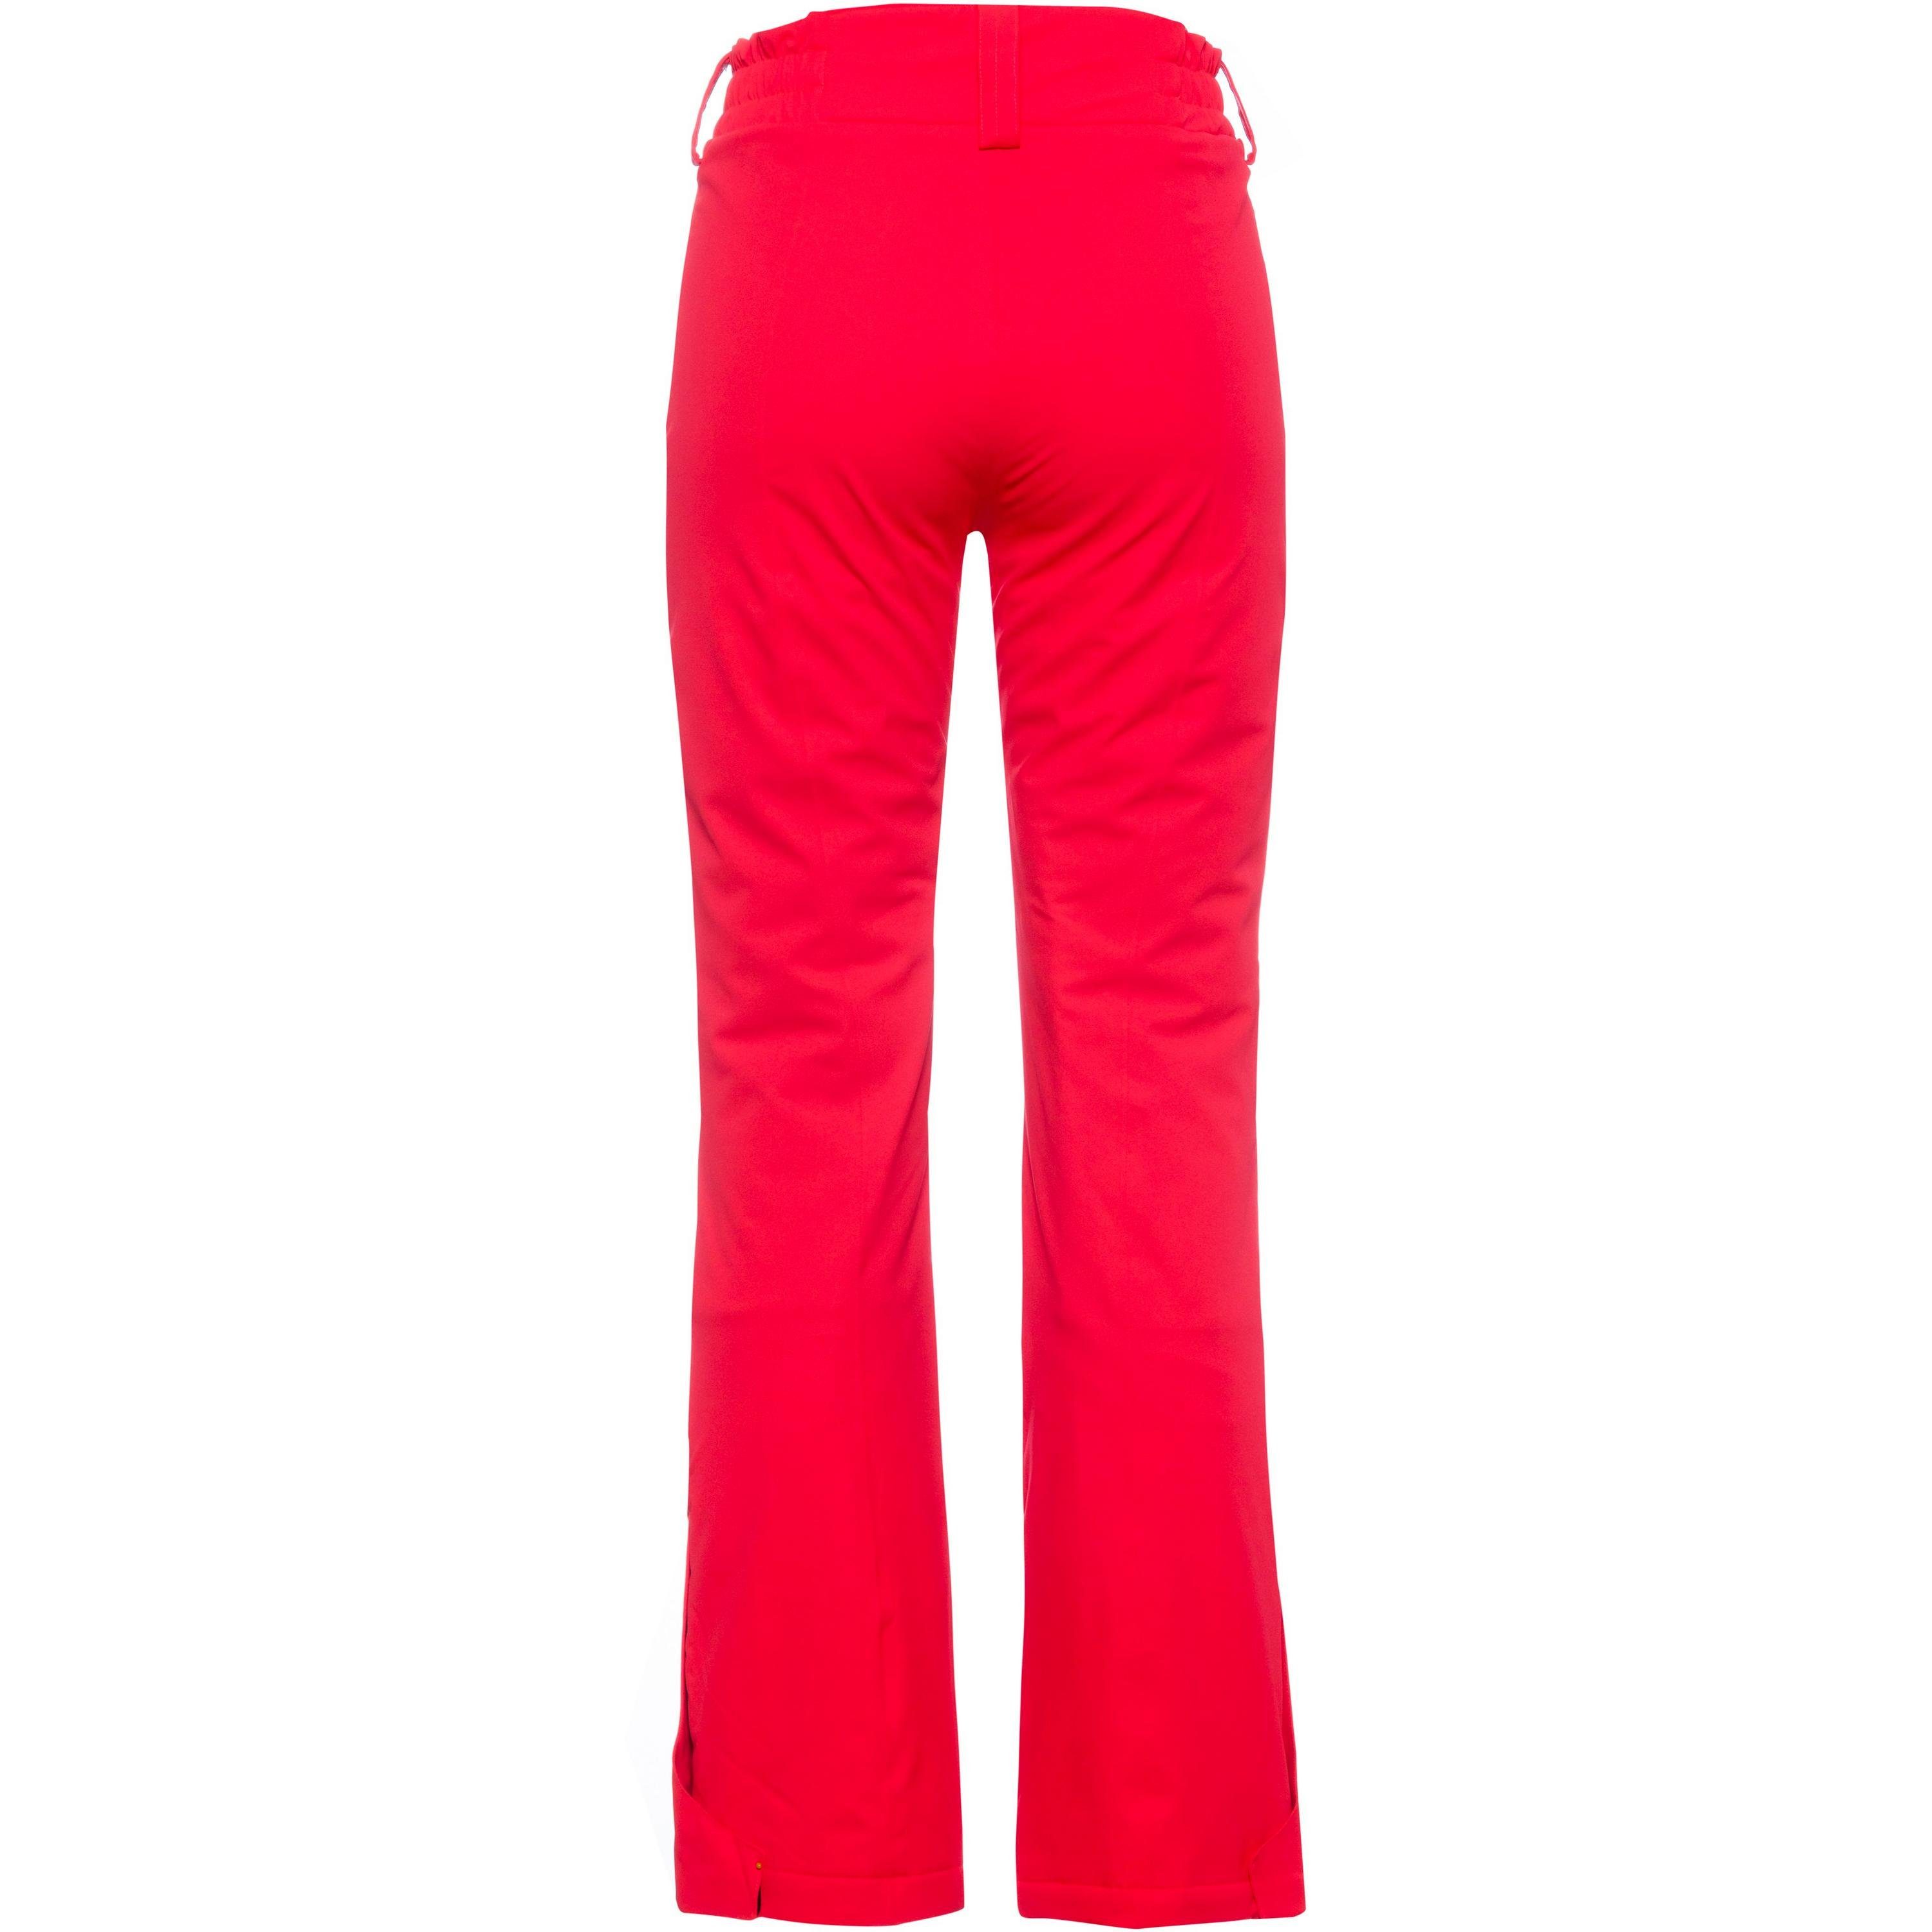 PANT WOMAN red fluo CMP Skihose